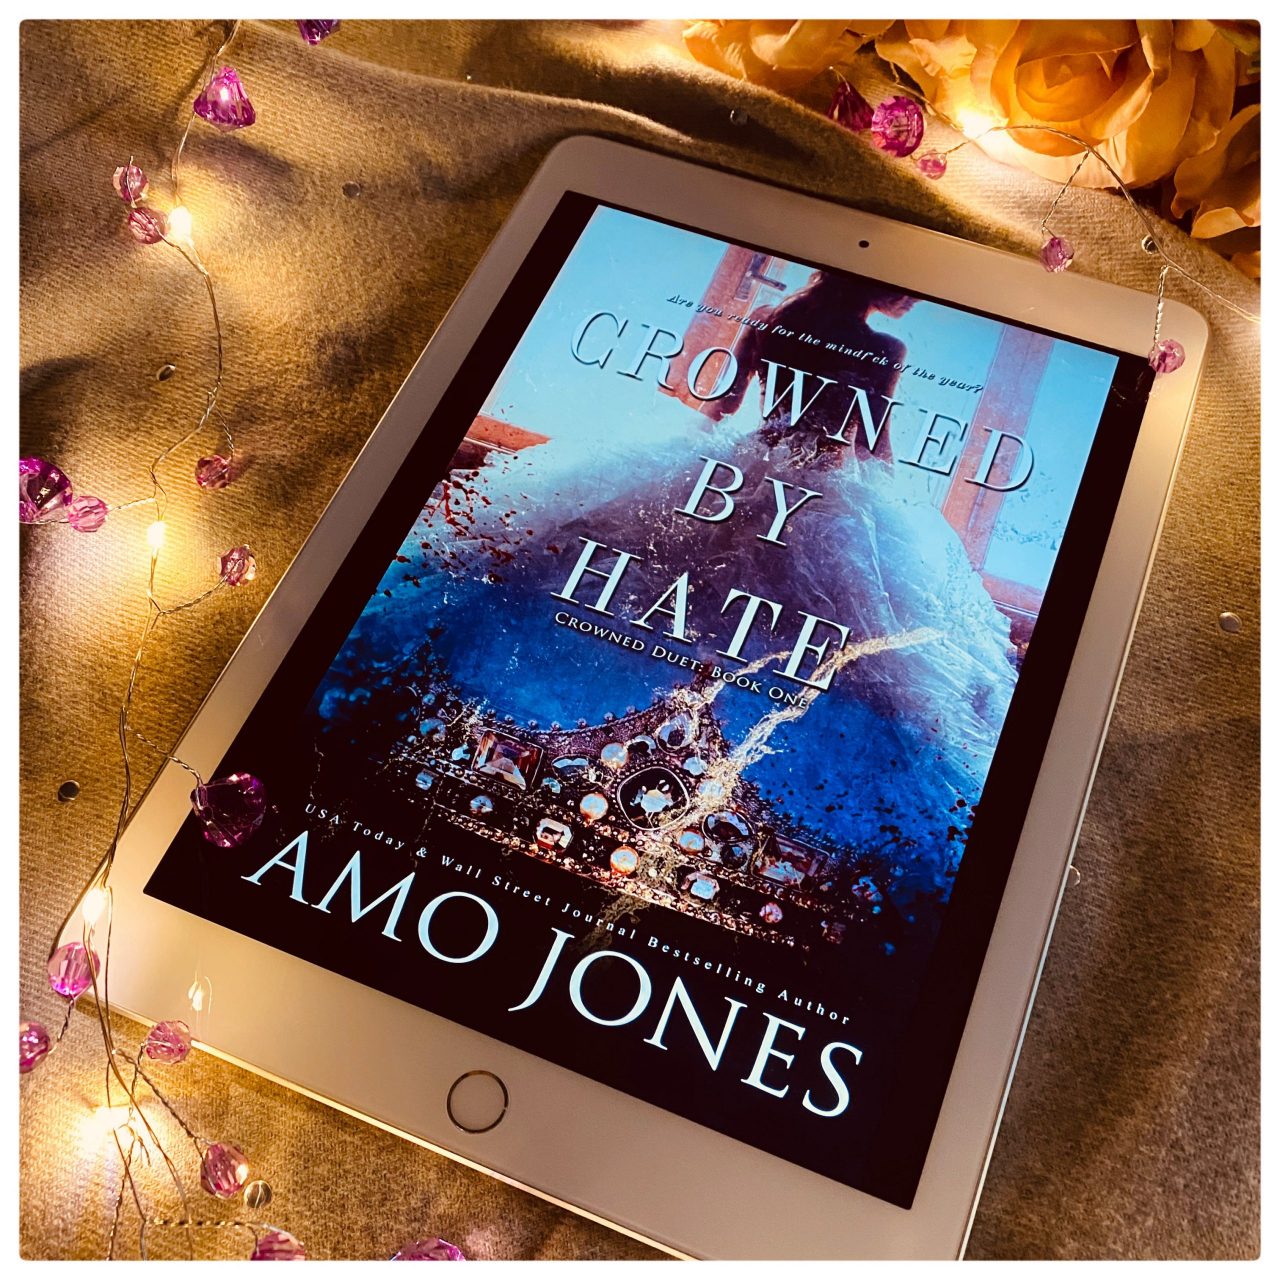 Crowned by Hate by Amo Jones